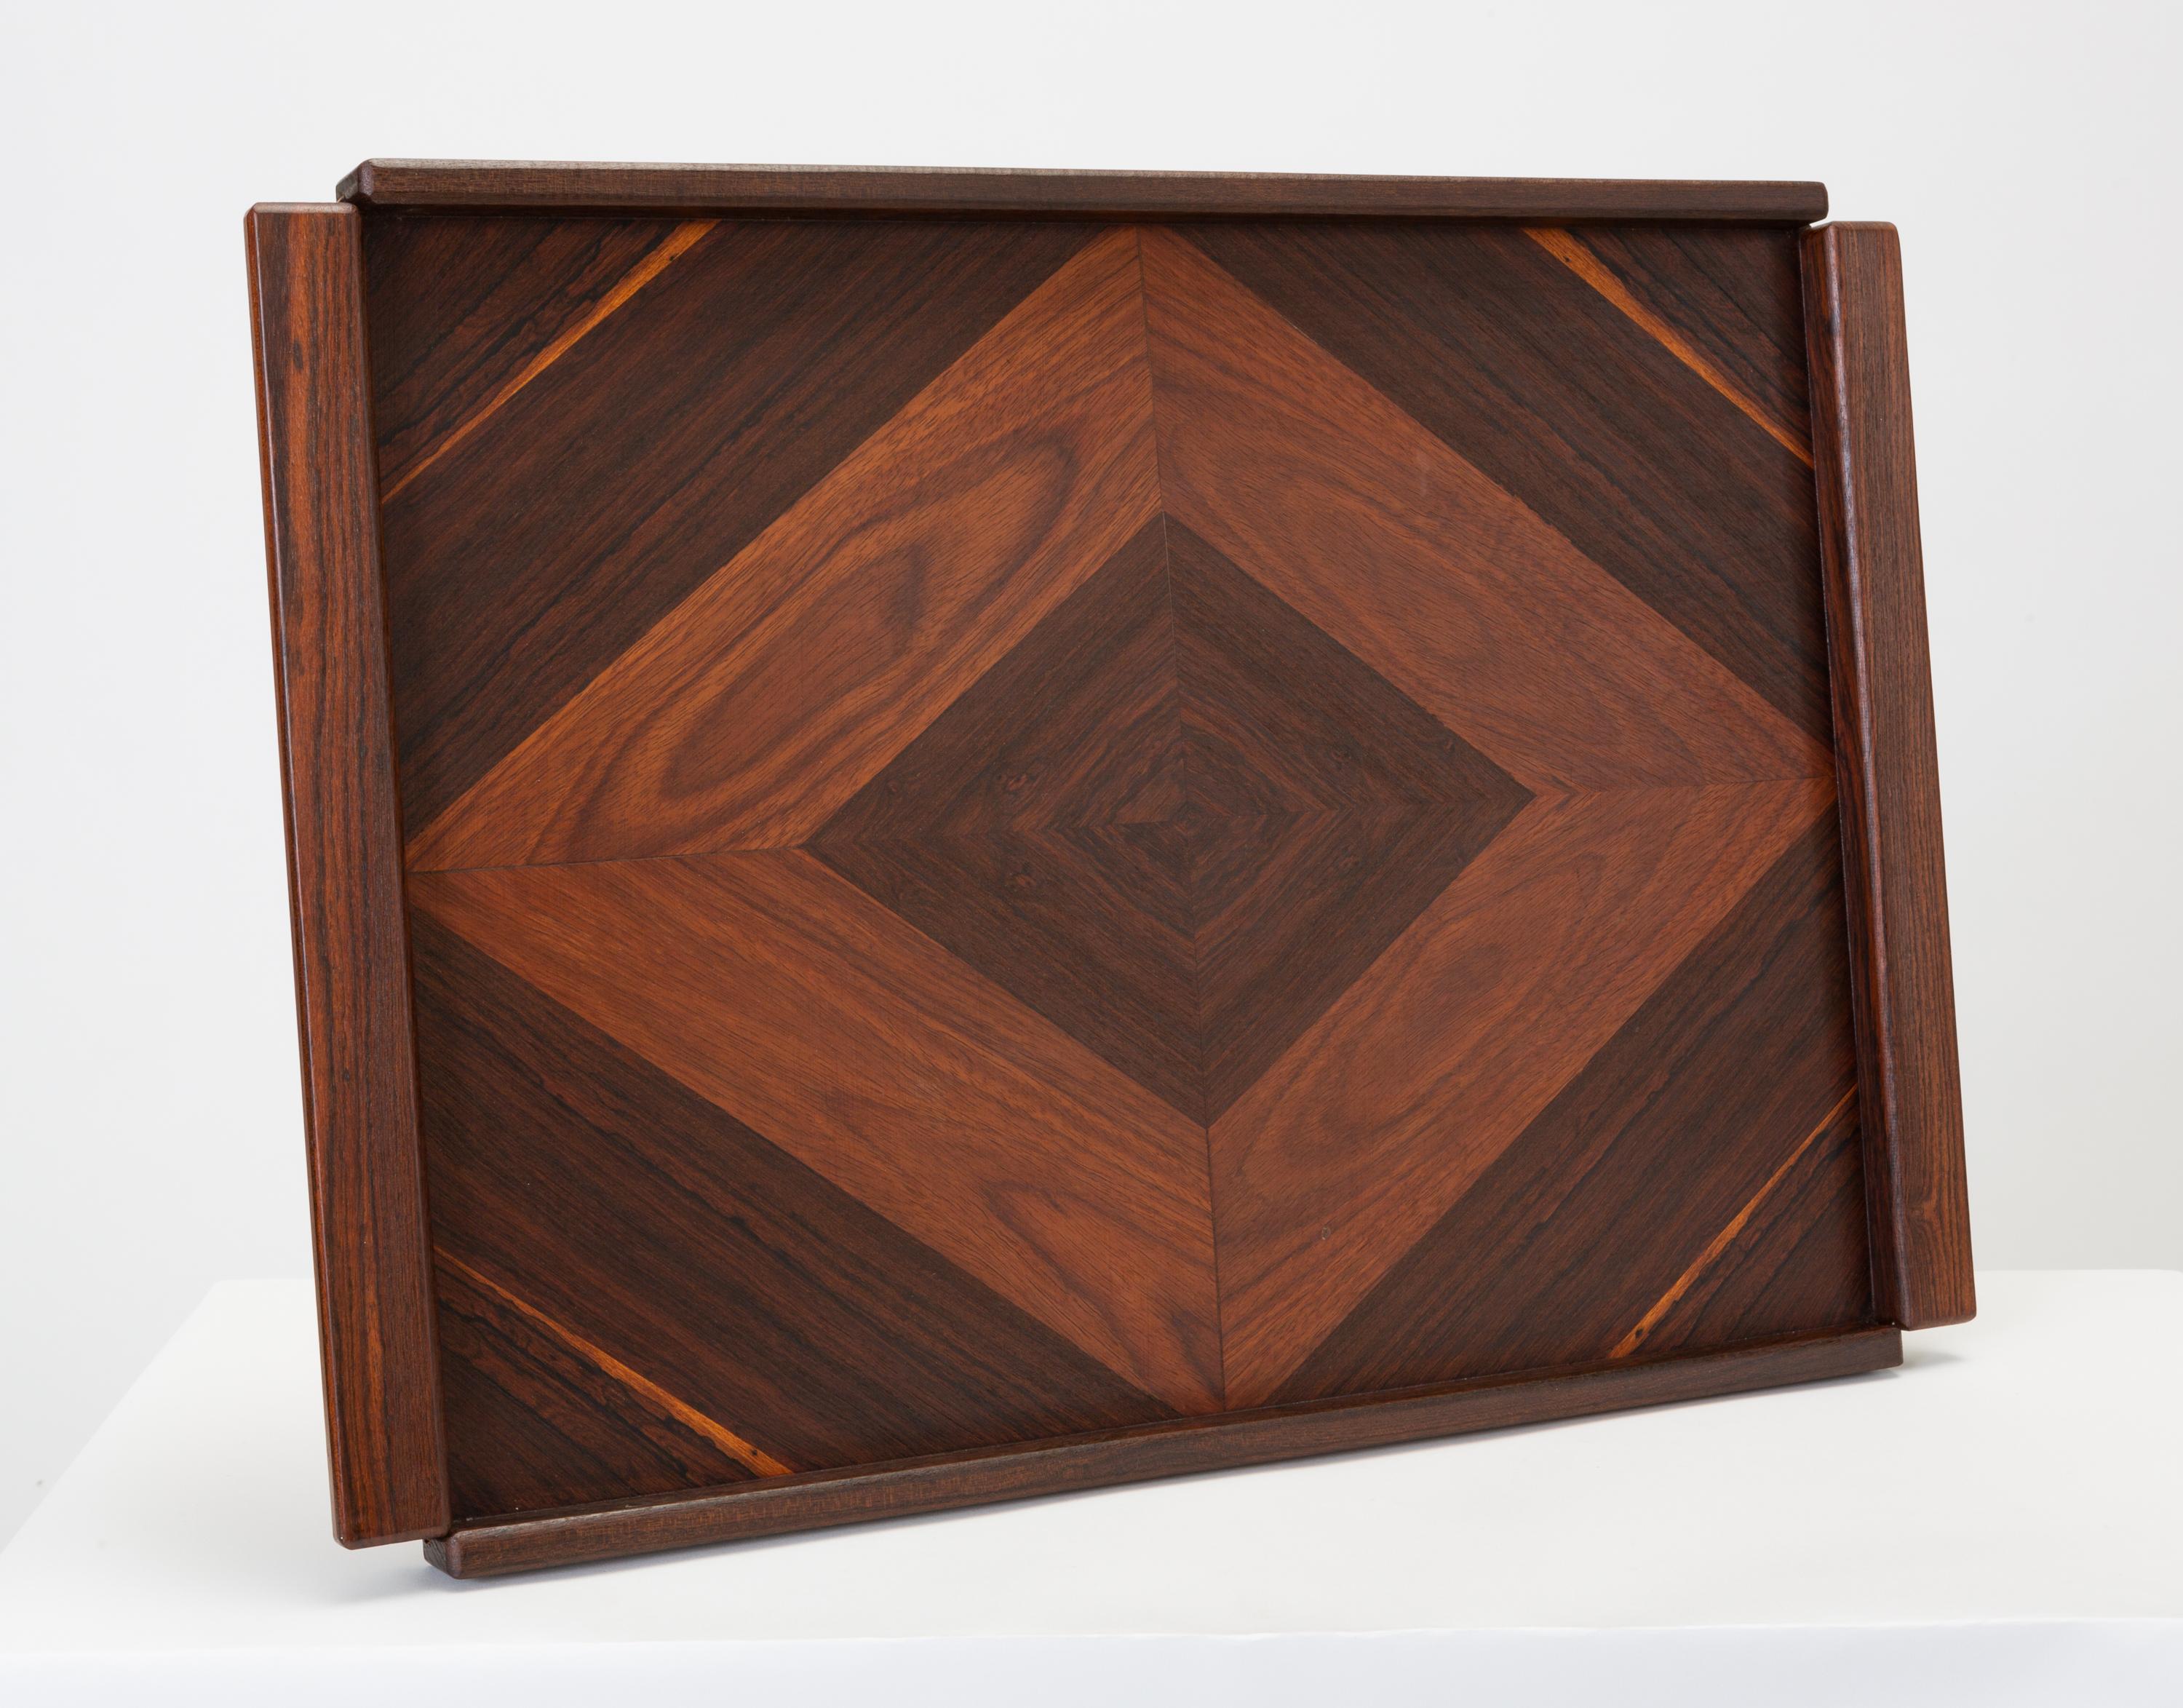 A rosewood tray by Don Shoemaker for Señal, designed and produced in Mexico. This example features an inlay pattern that forms a large diamond around the centre of the tray surface. The rosewood end pieces have a slight overhang that functions as a